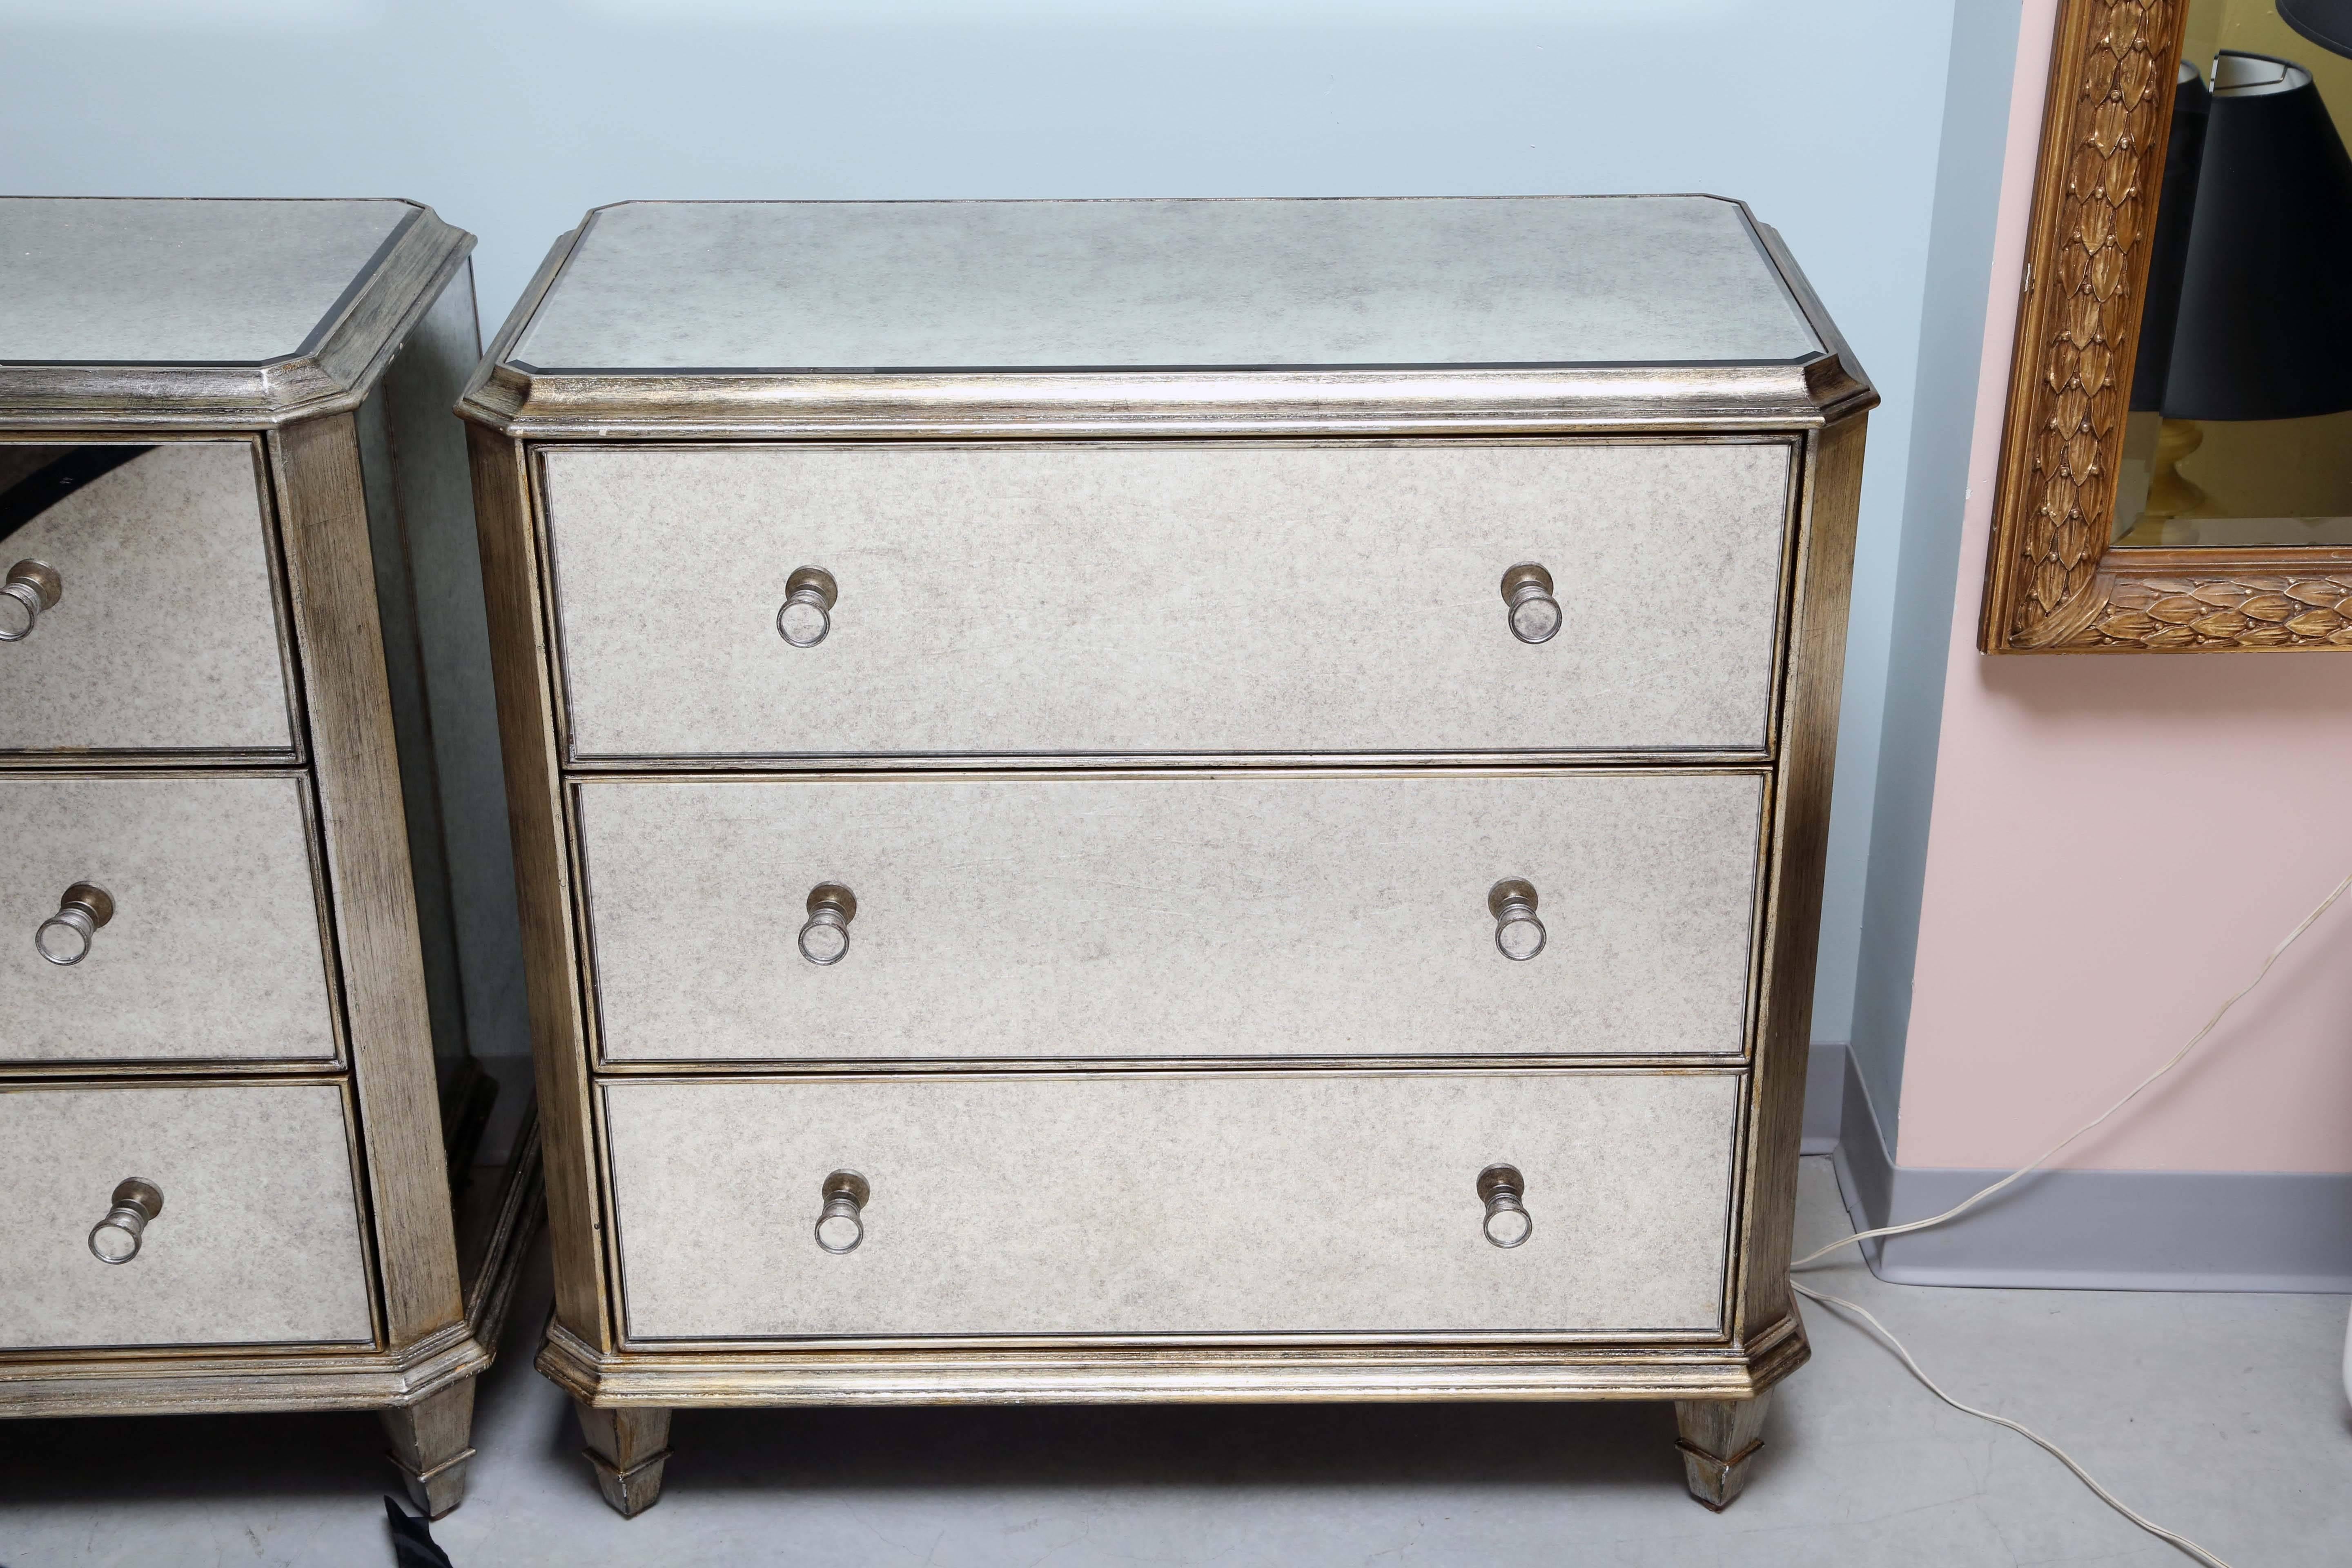 Splendid and elegant dressers, great condition, drawers are all lined,
the back of the dressers are finished  in antique silver paint.